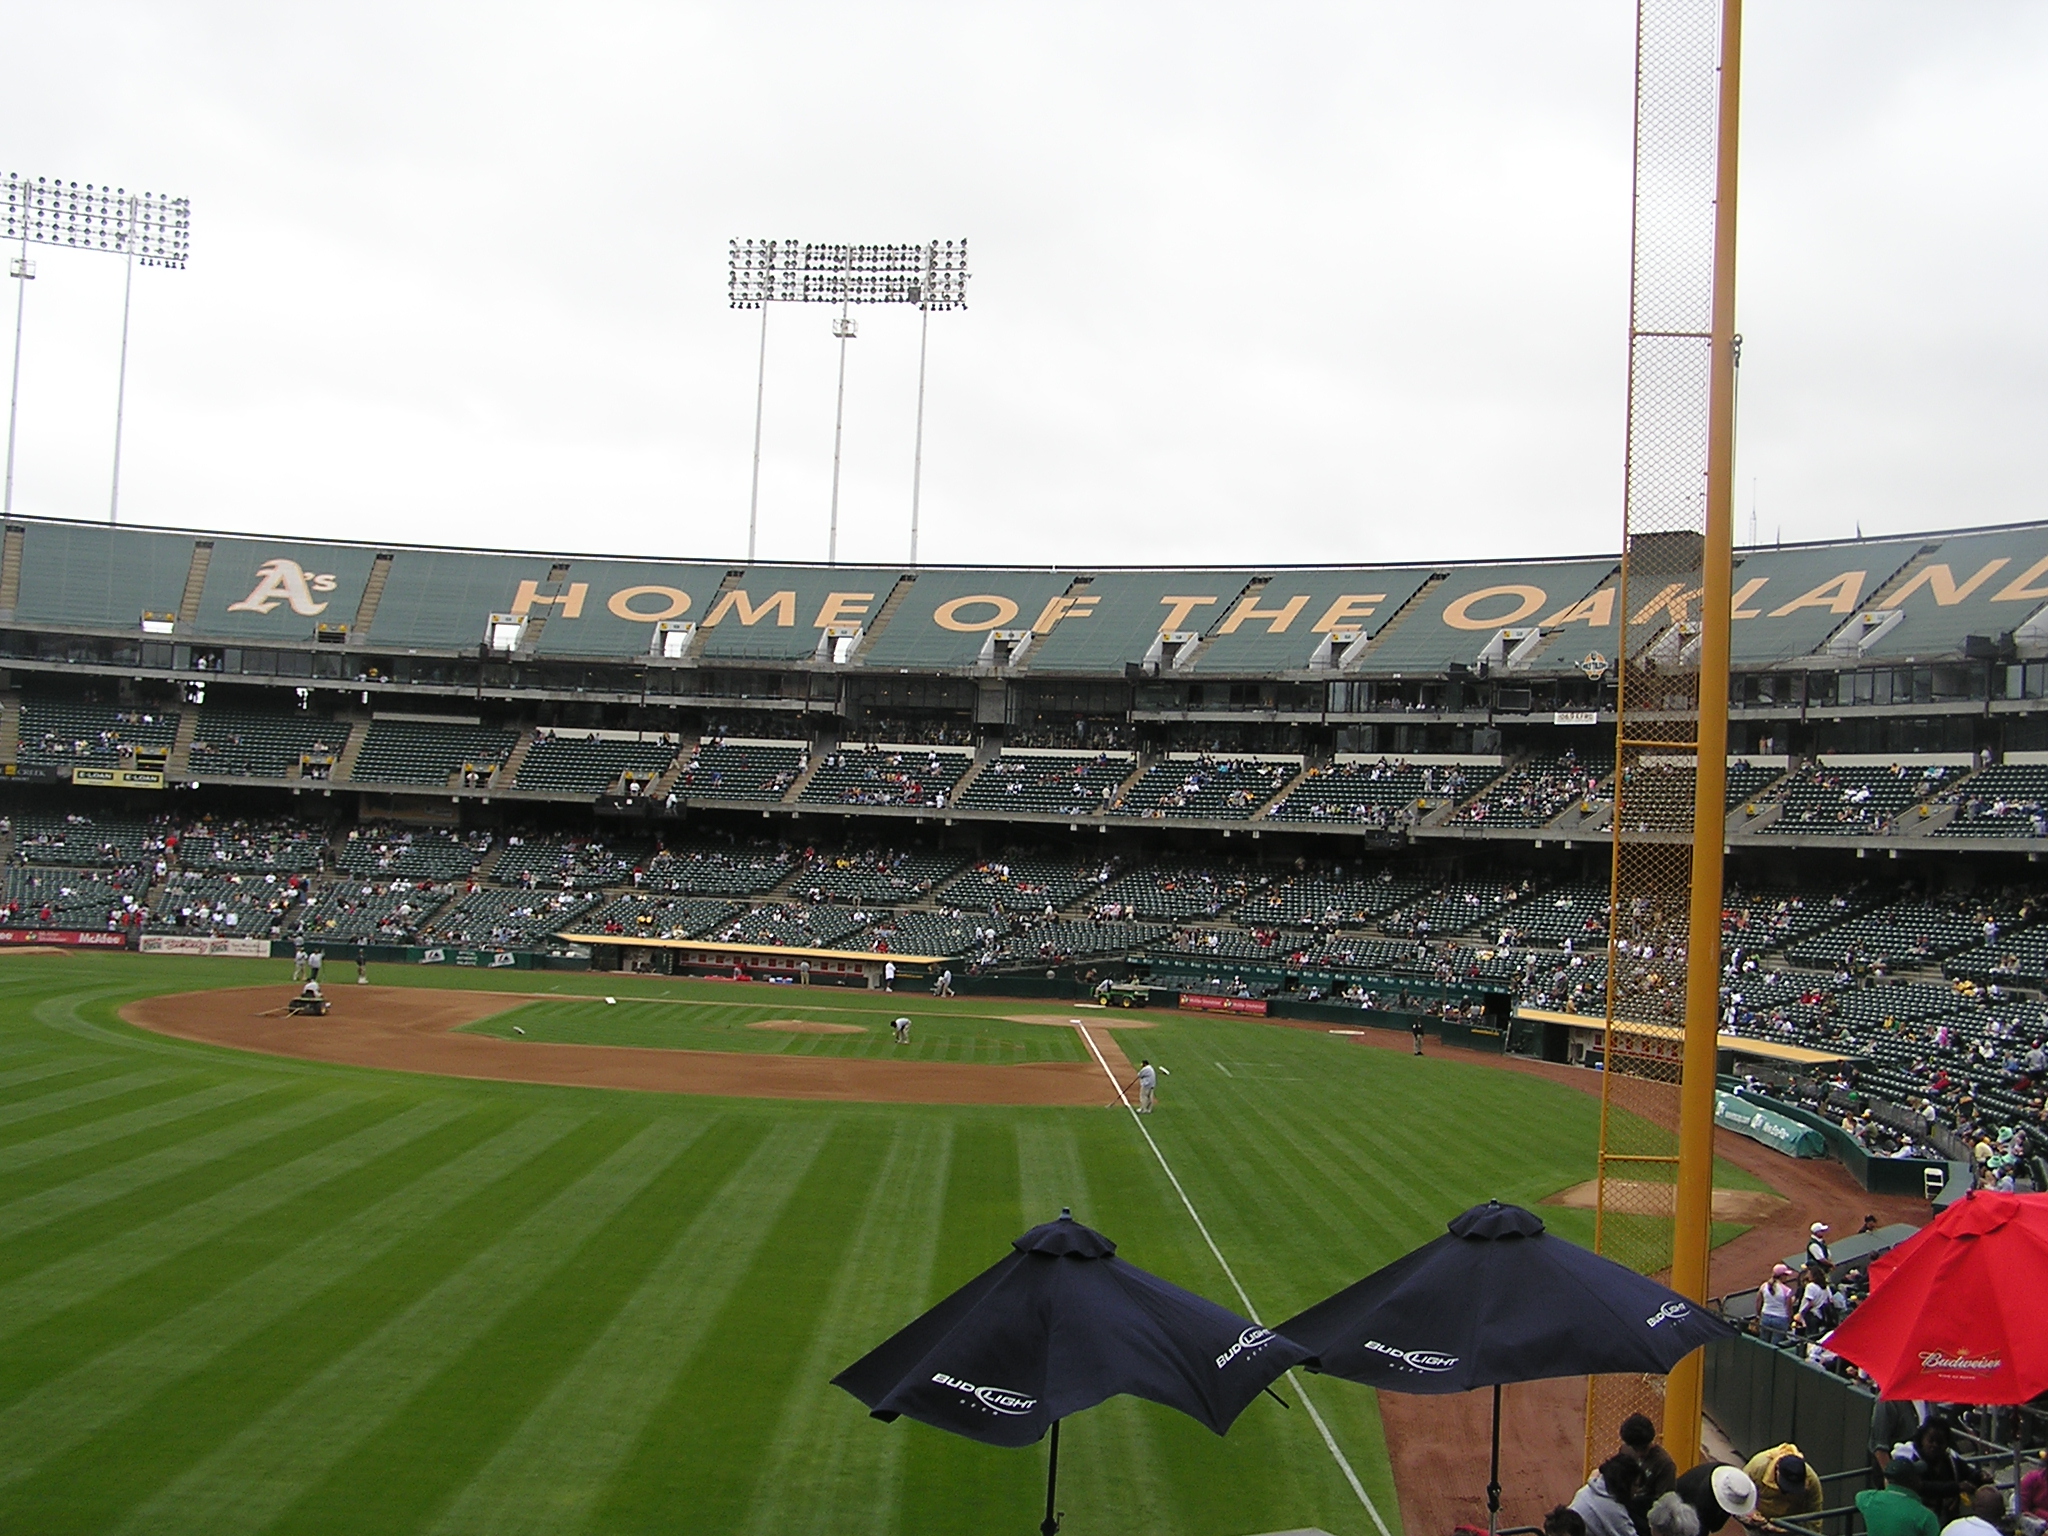 Right Field, McAfee Coliseum, Oakland